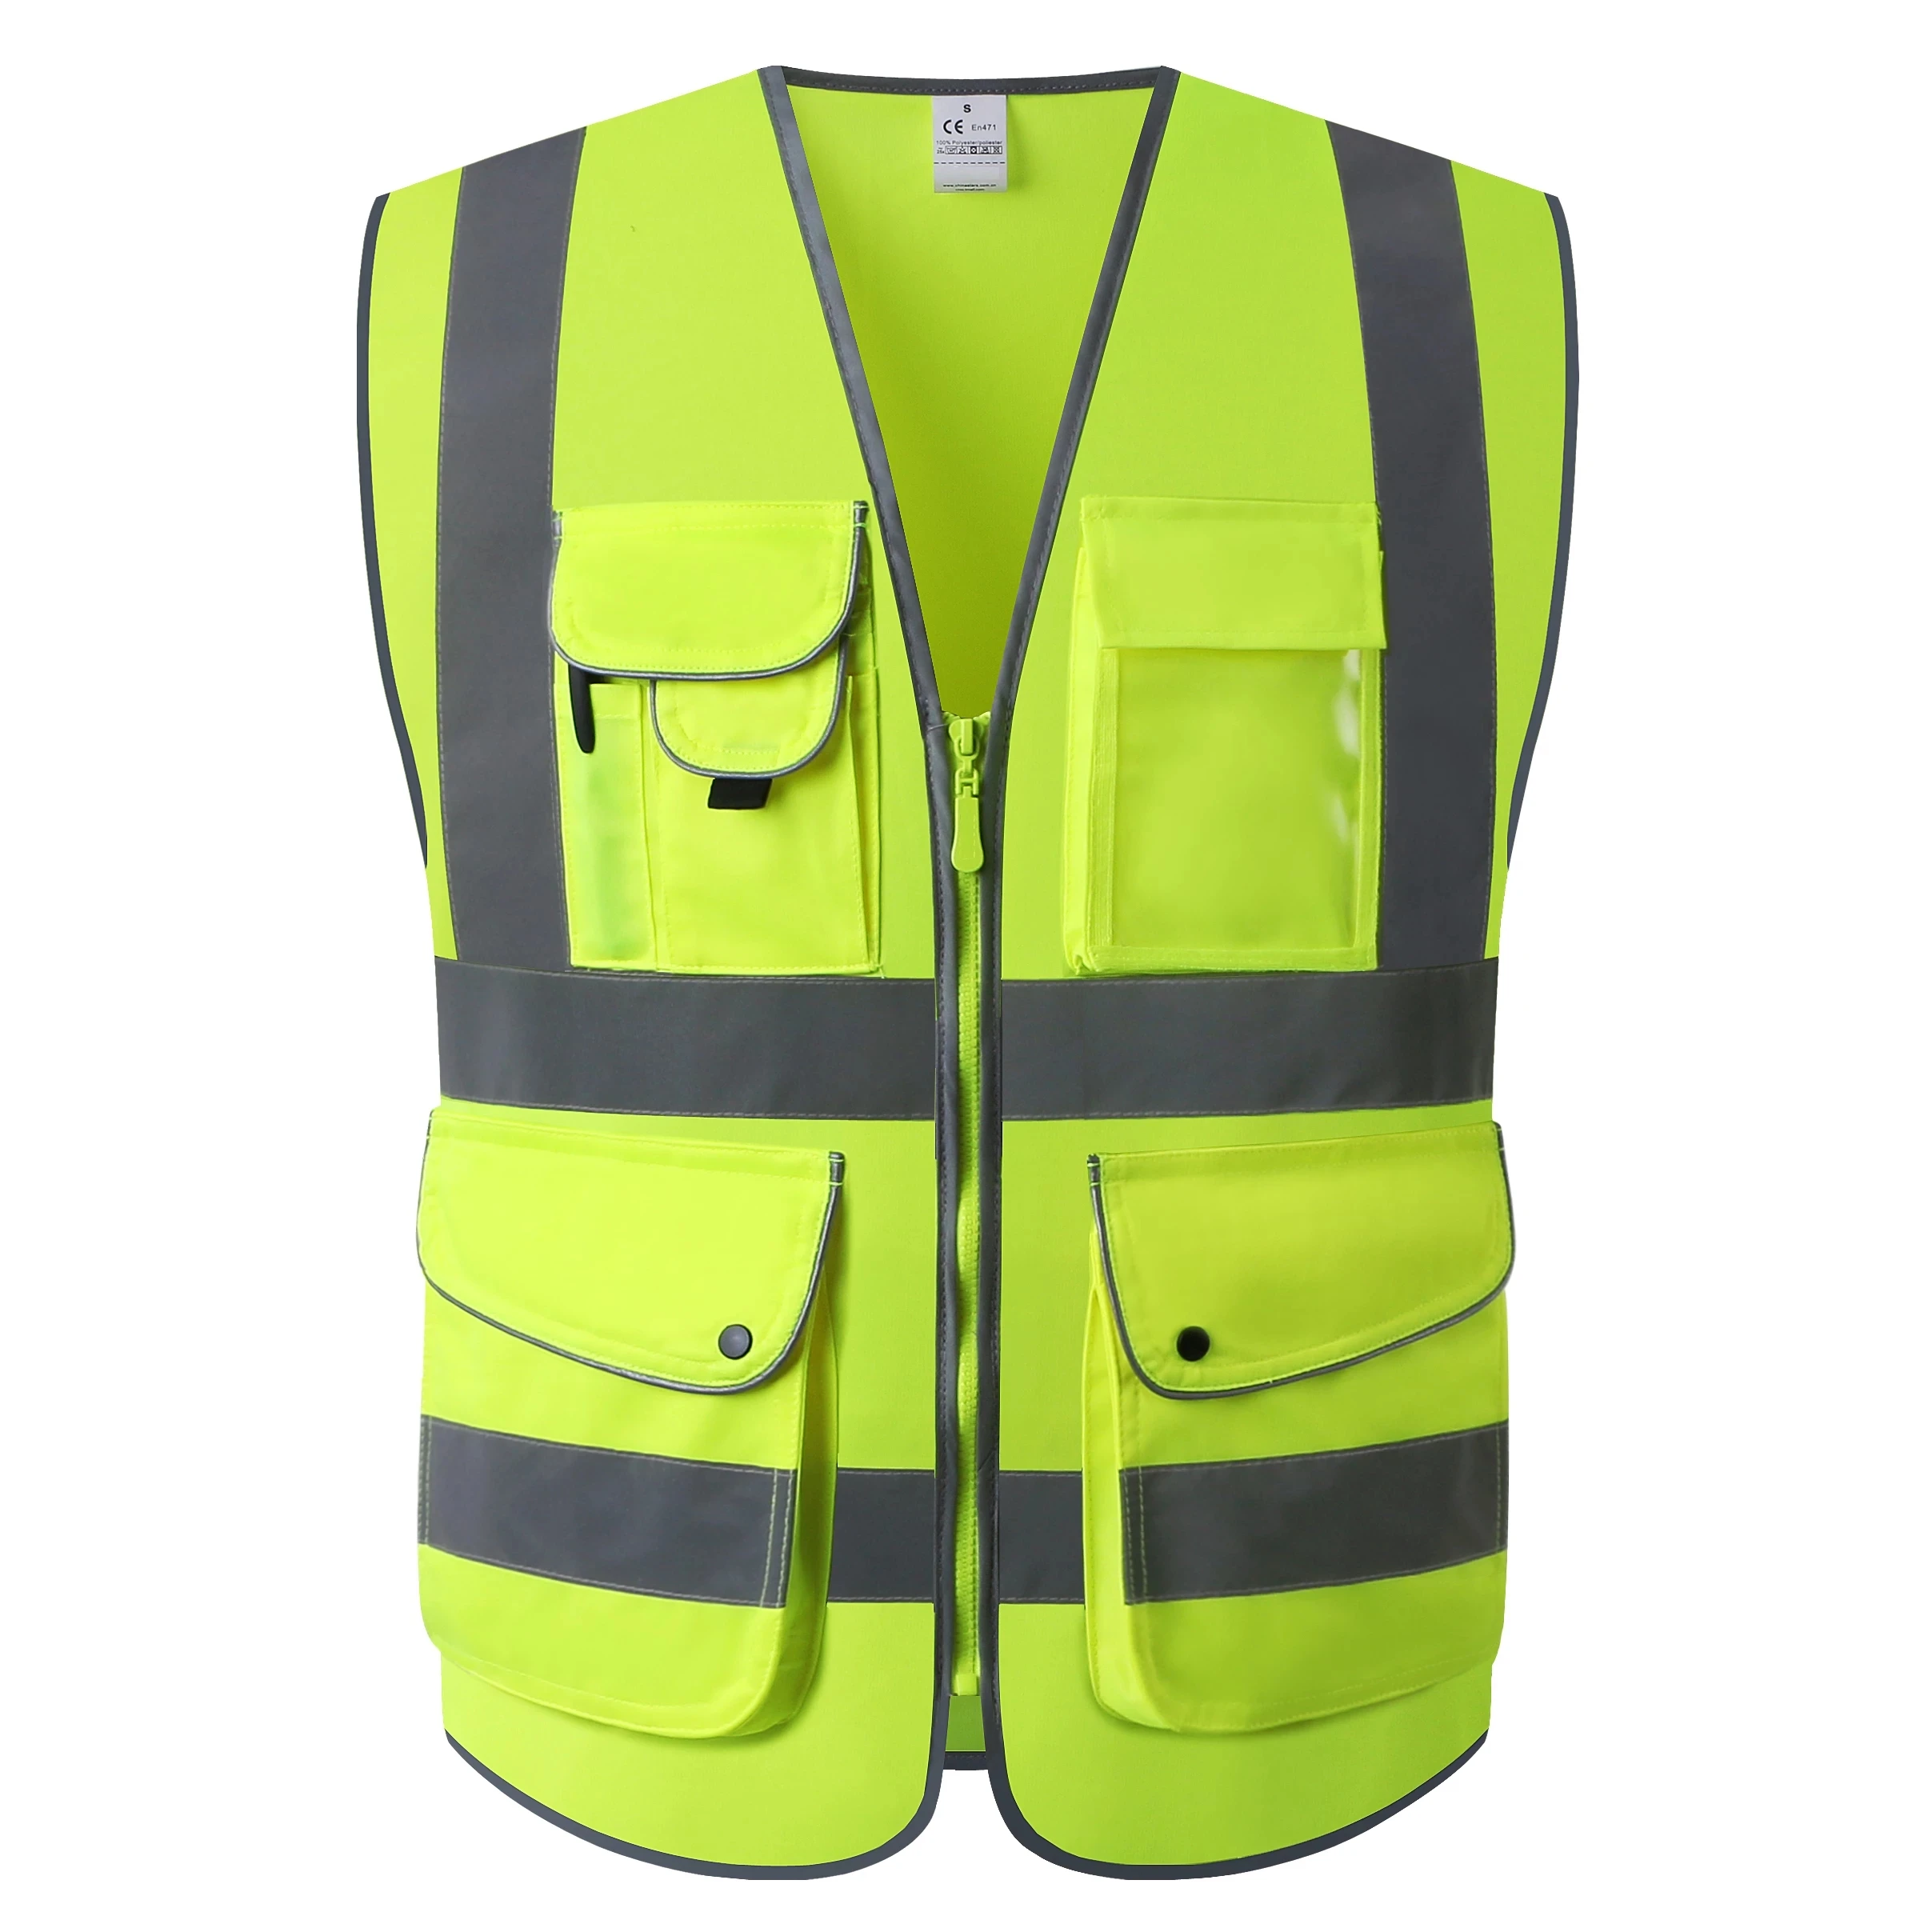 EU Driving High Visibility Reflective Safety Vest Waistcoat Motorcycle Riding 